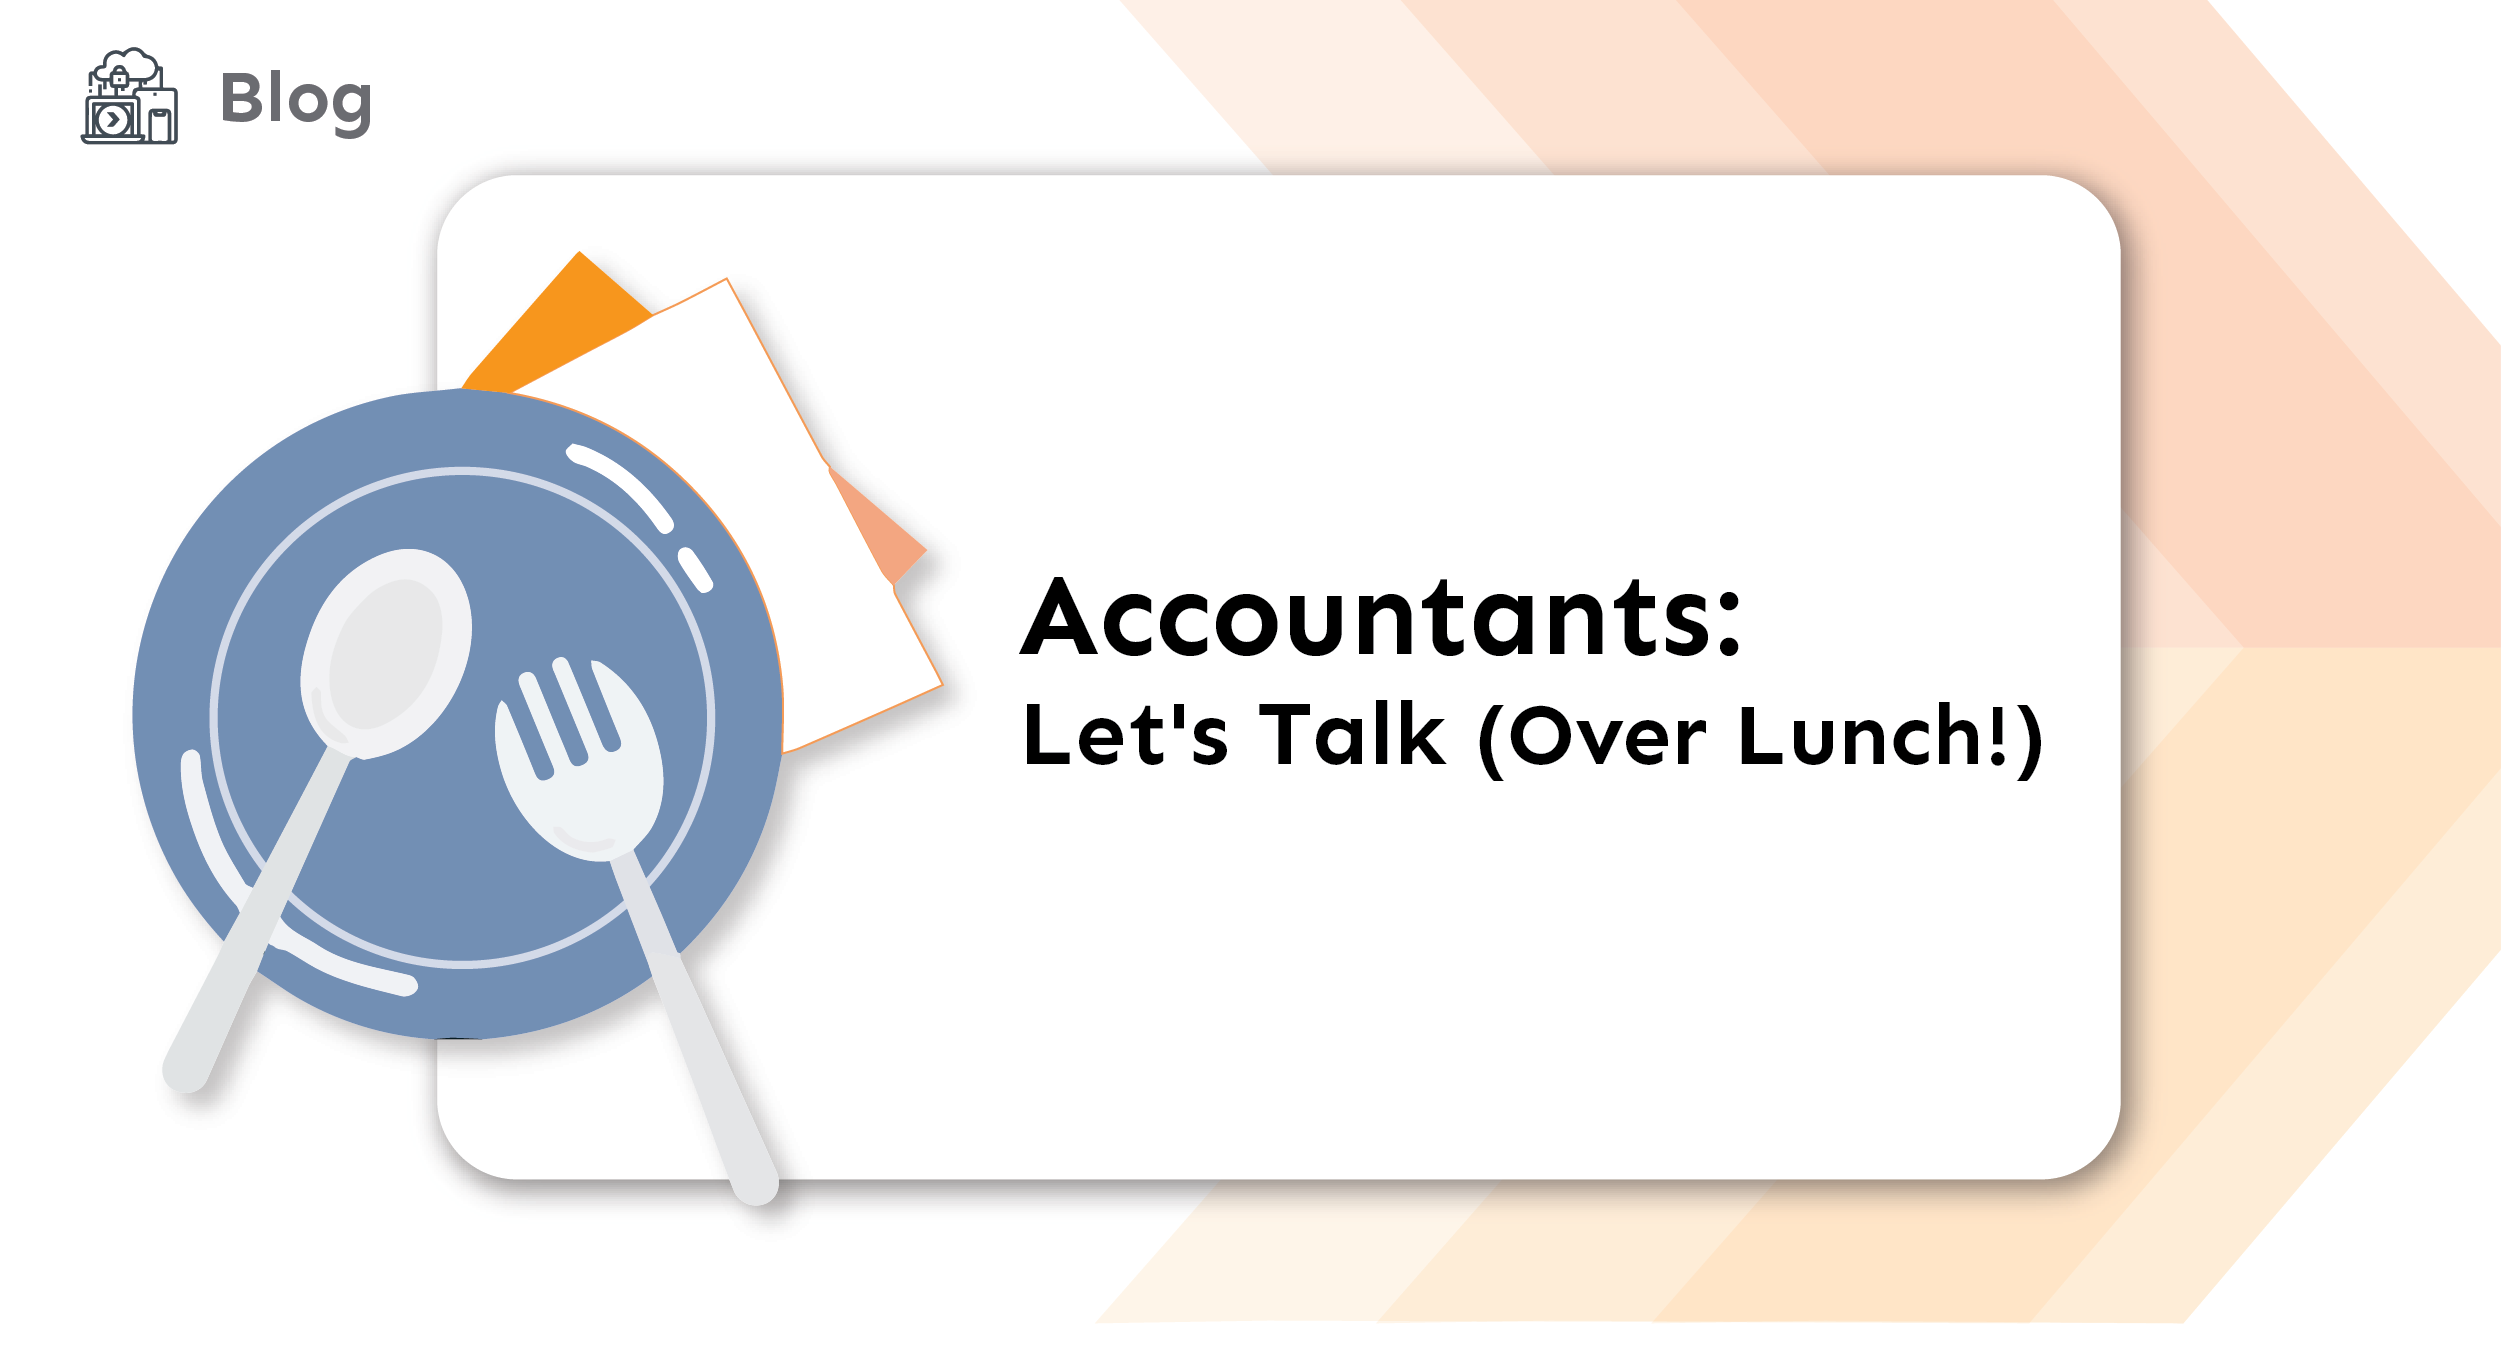 Accountants: Let’s Talk (Over Lunch!)